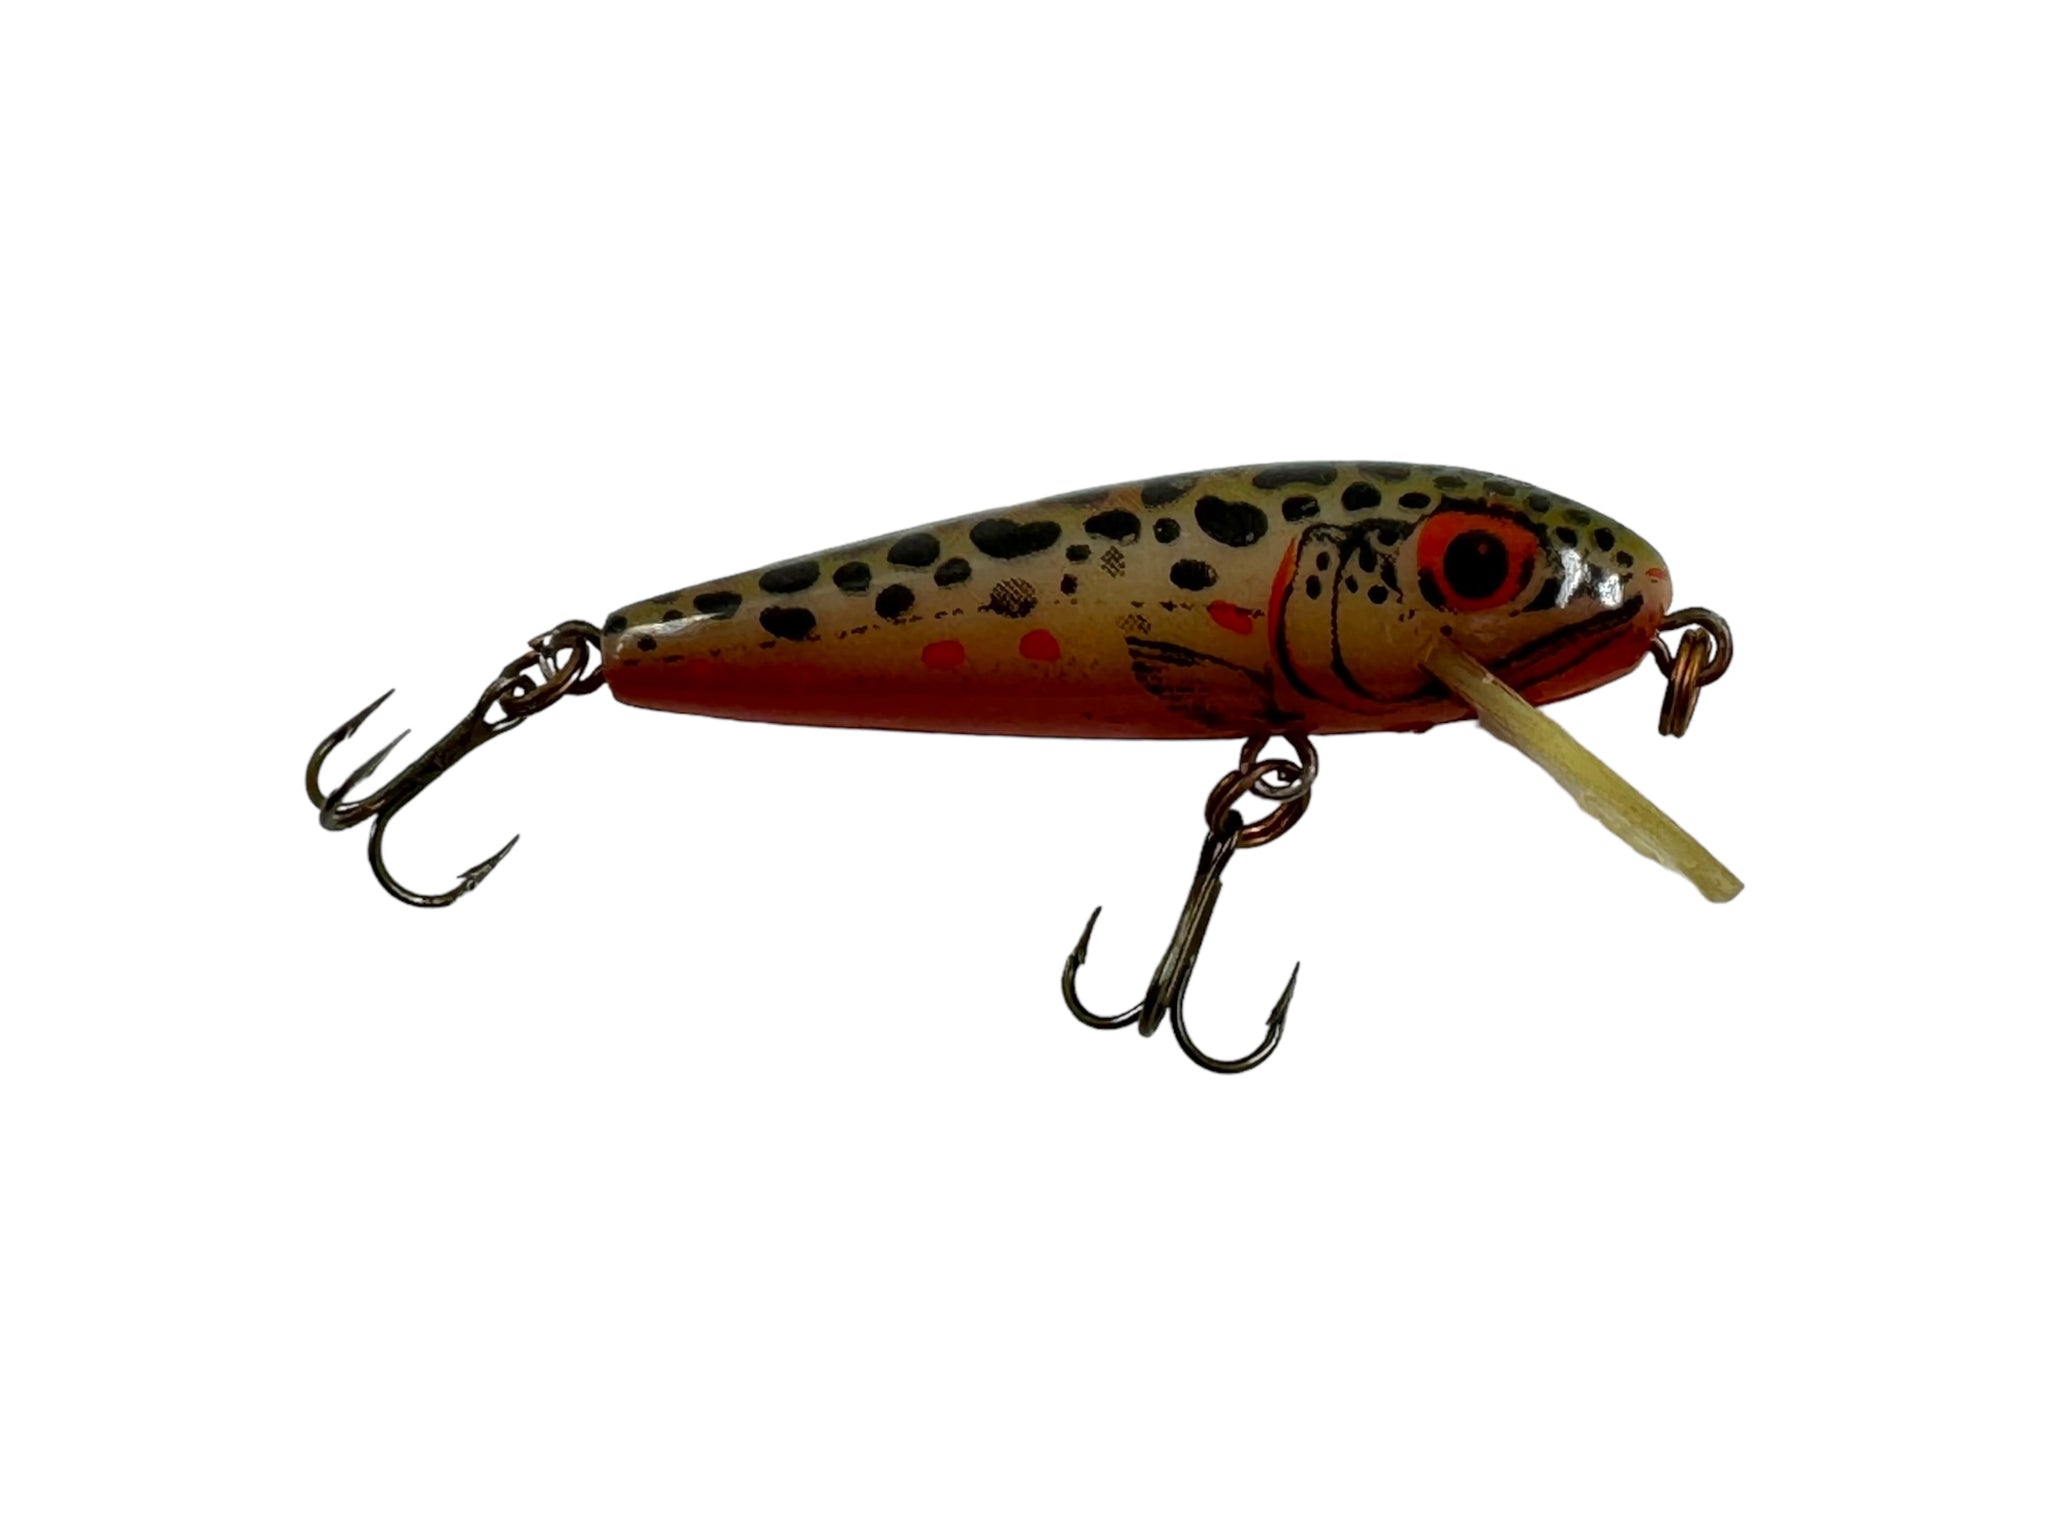 Ultralight REBEL LURES F49 MINNOW Fishing Lure • BROWN TROUT